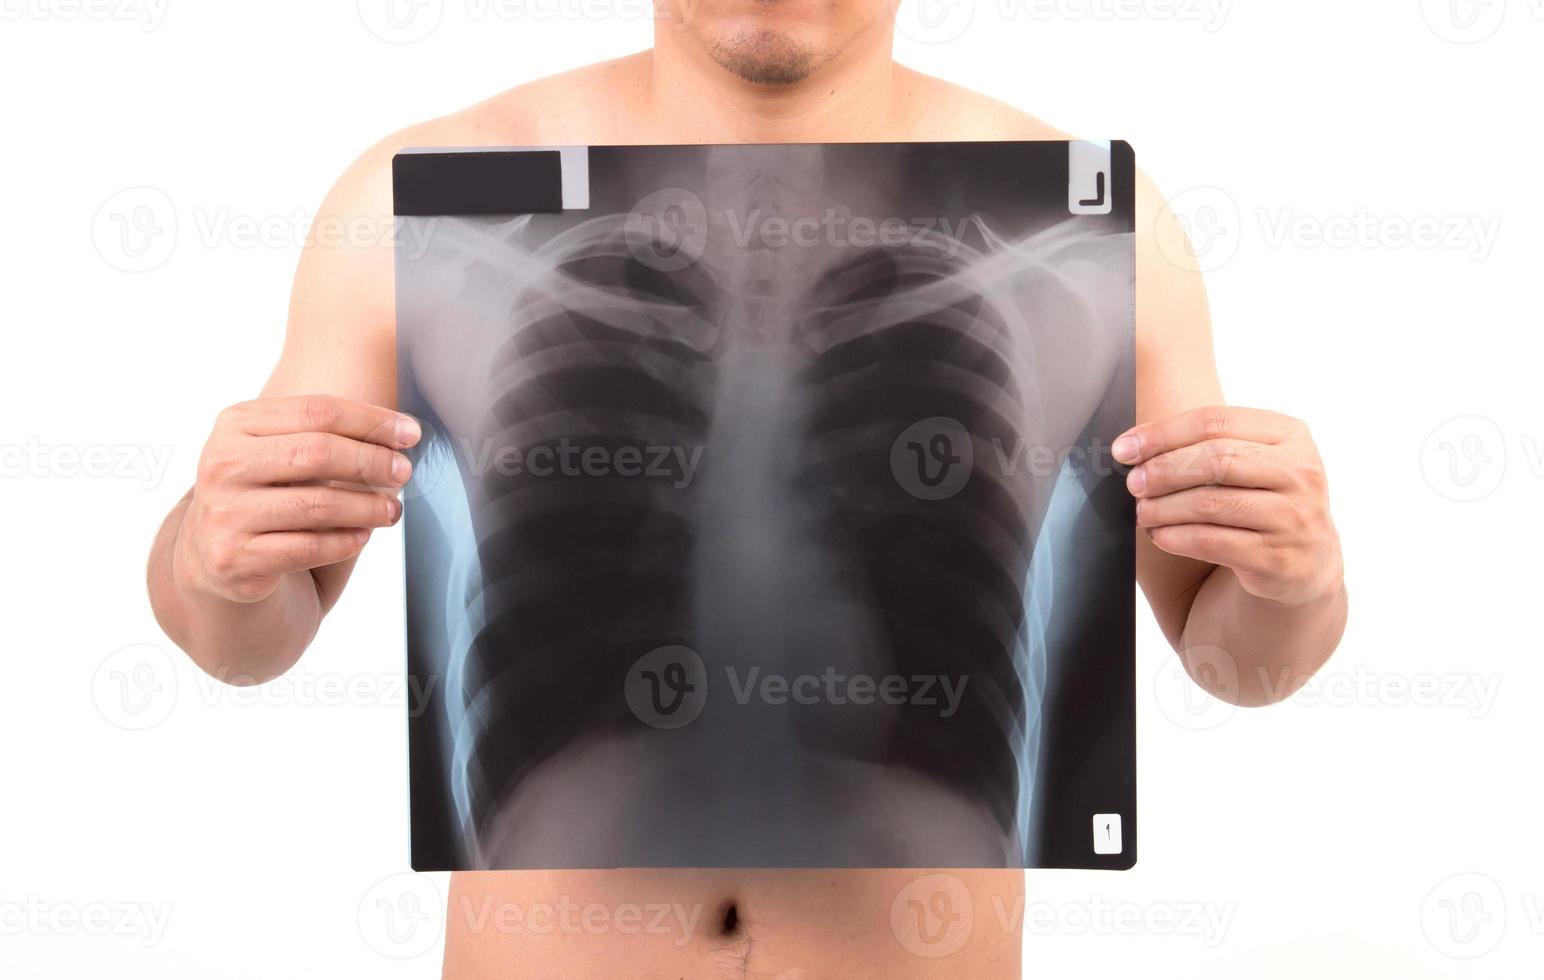 unidentify person showing x-ray film photo